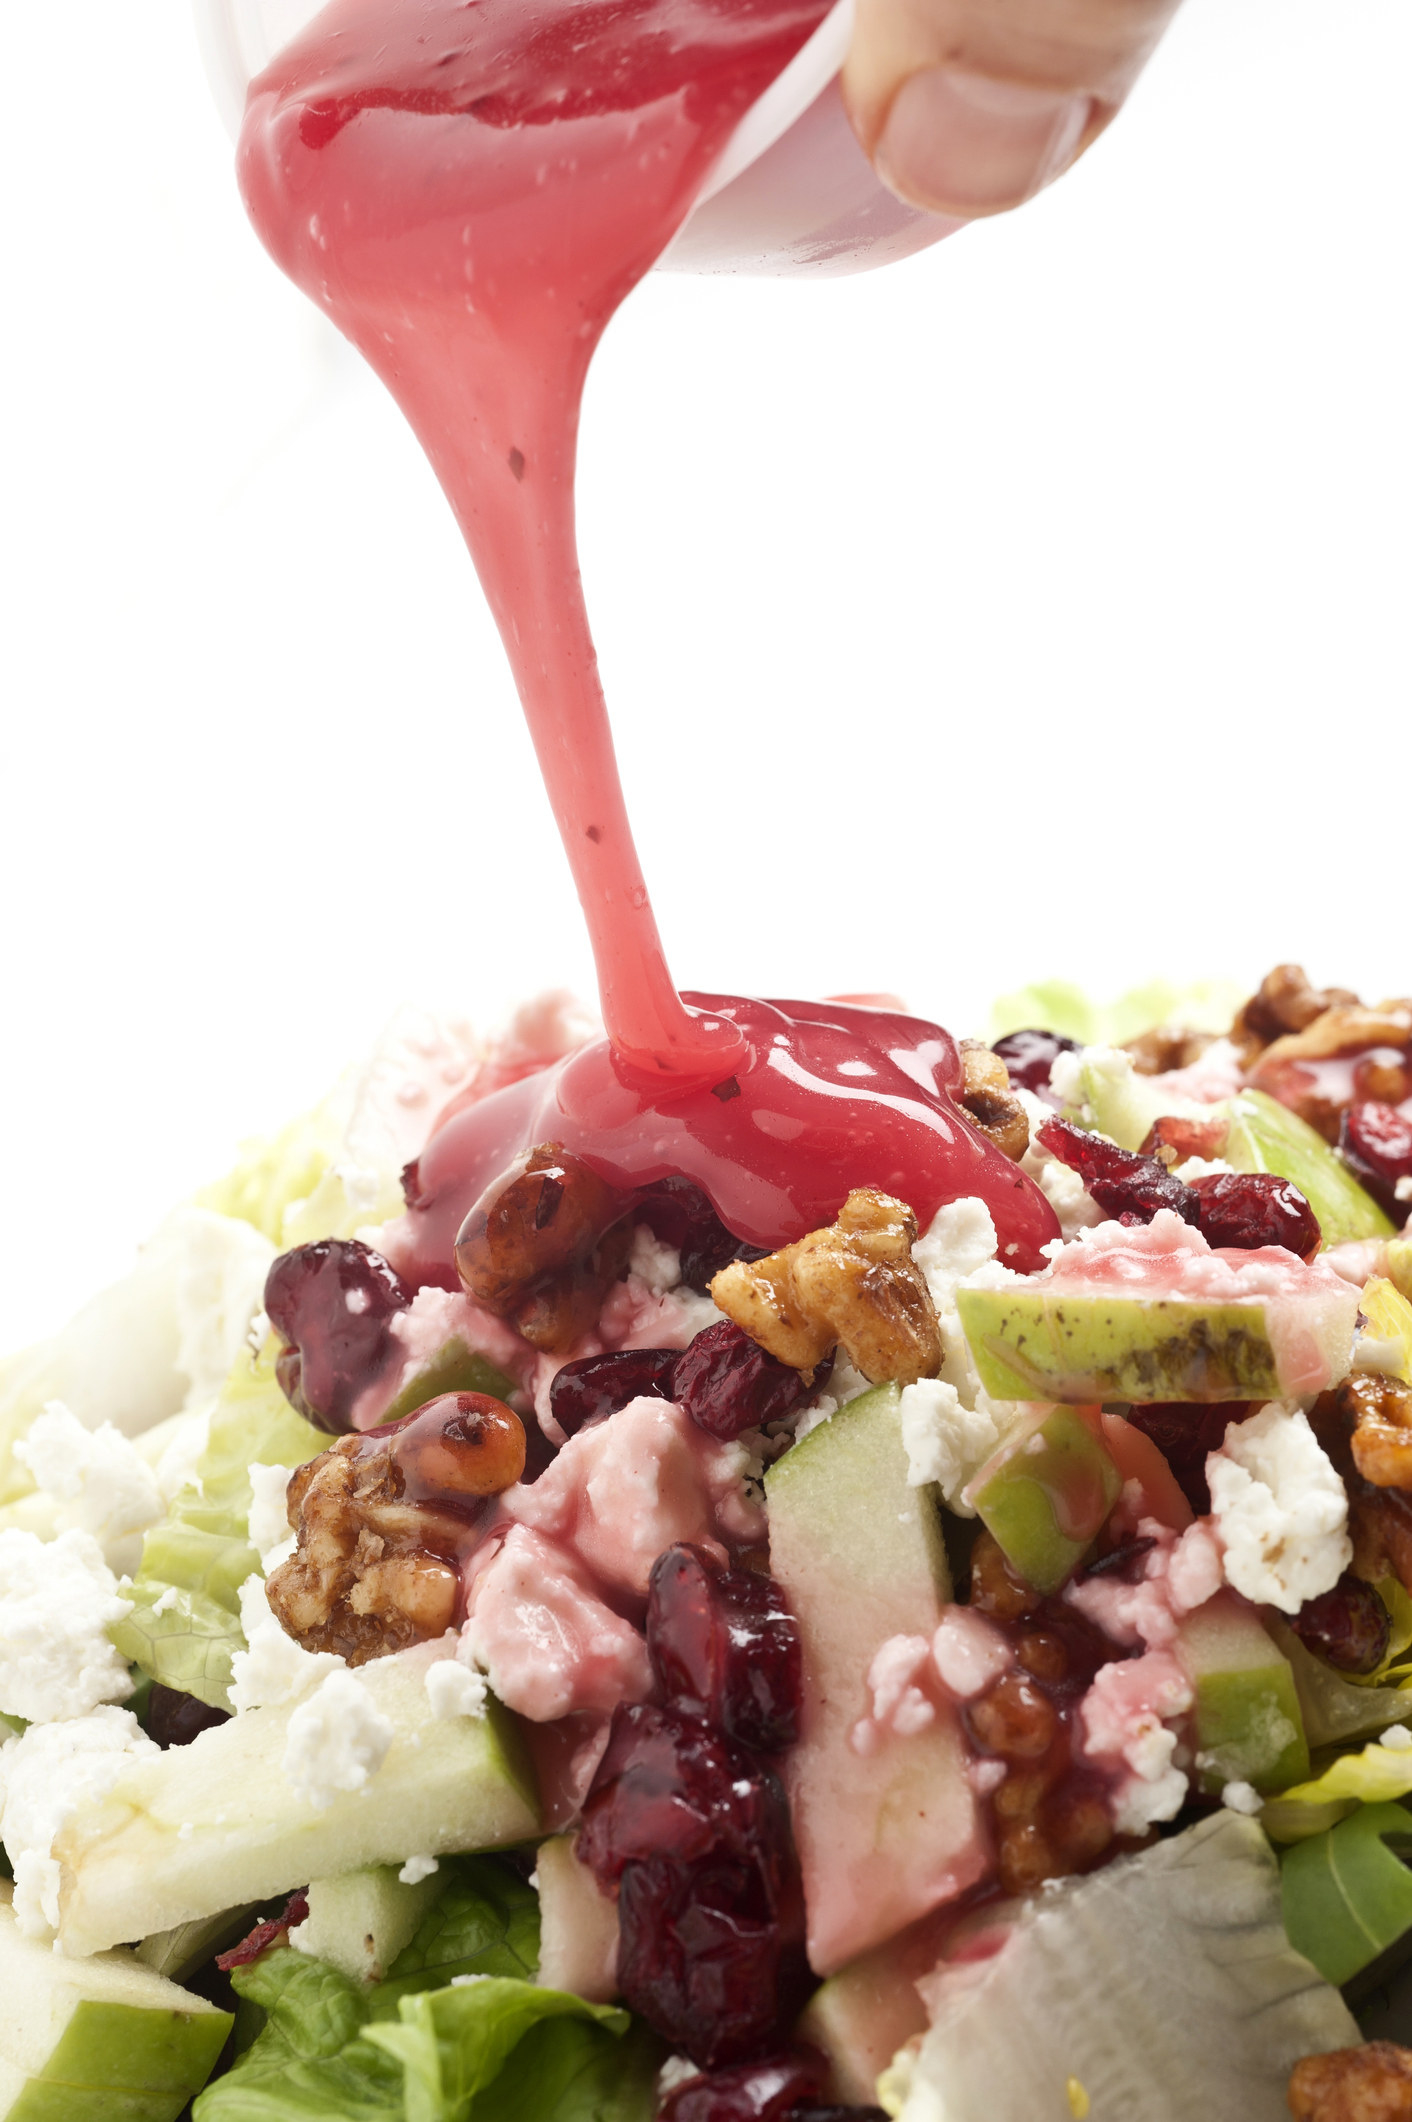 Coating a salad with pink dressing.